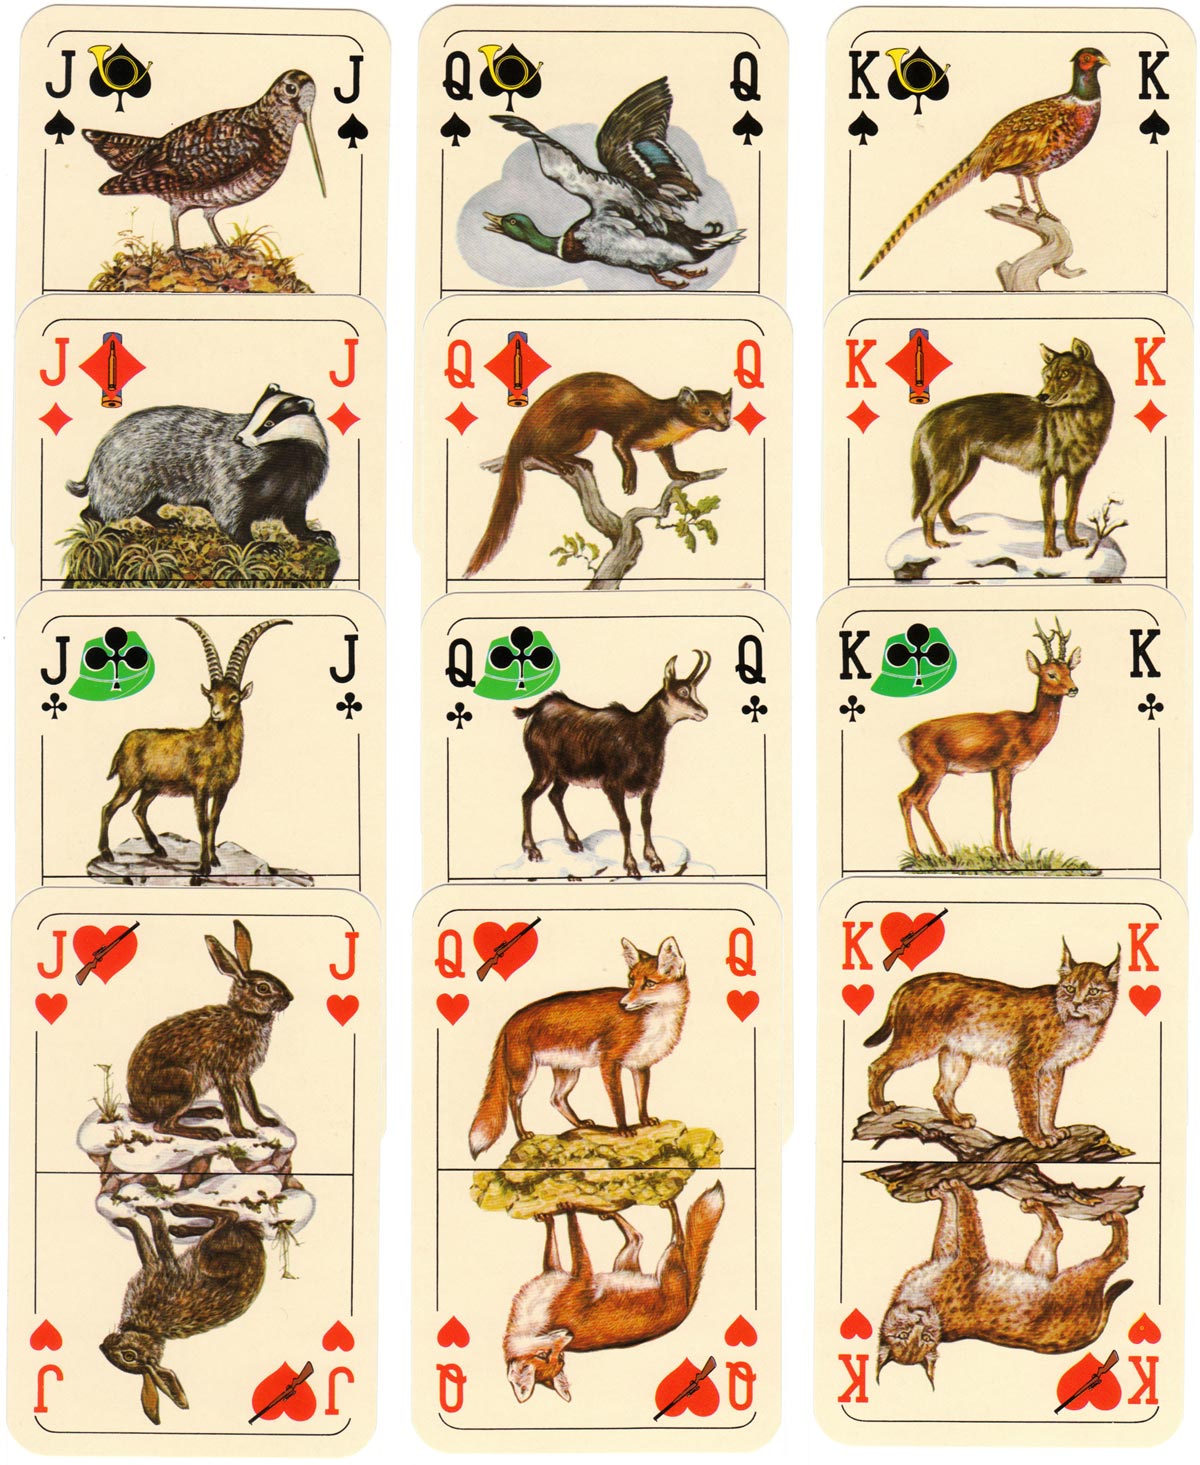 “Hunter’s Bridge” playing cards by ASS depicting animals and associated symbols of hunting, c.1976